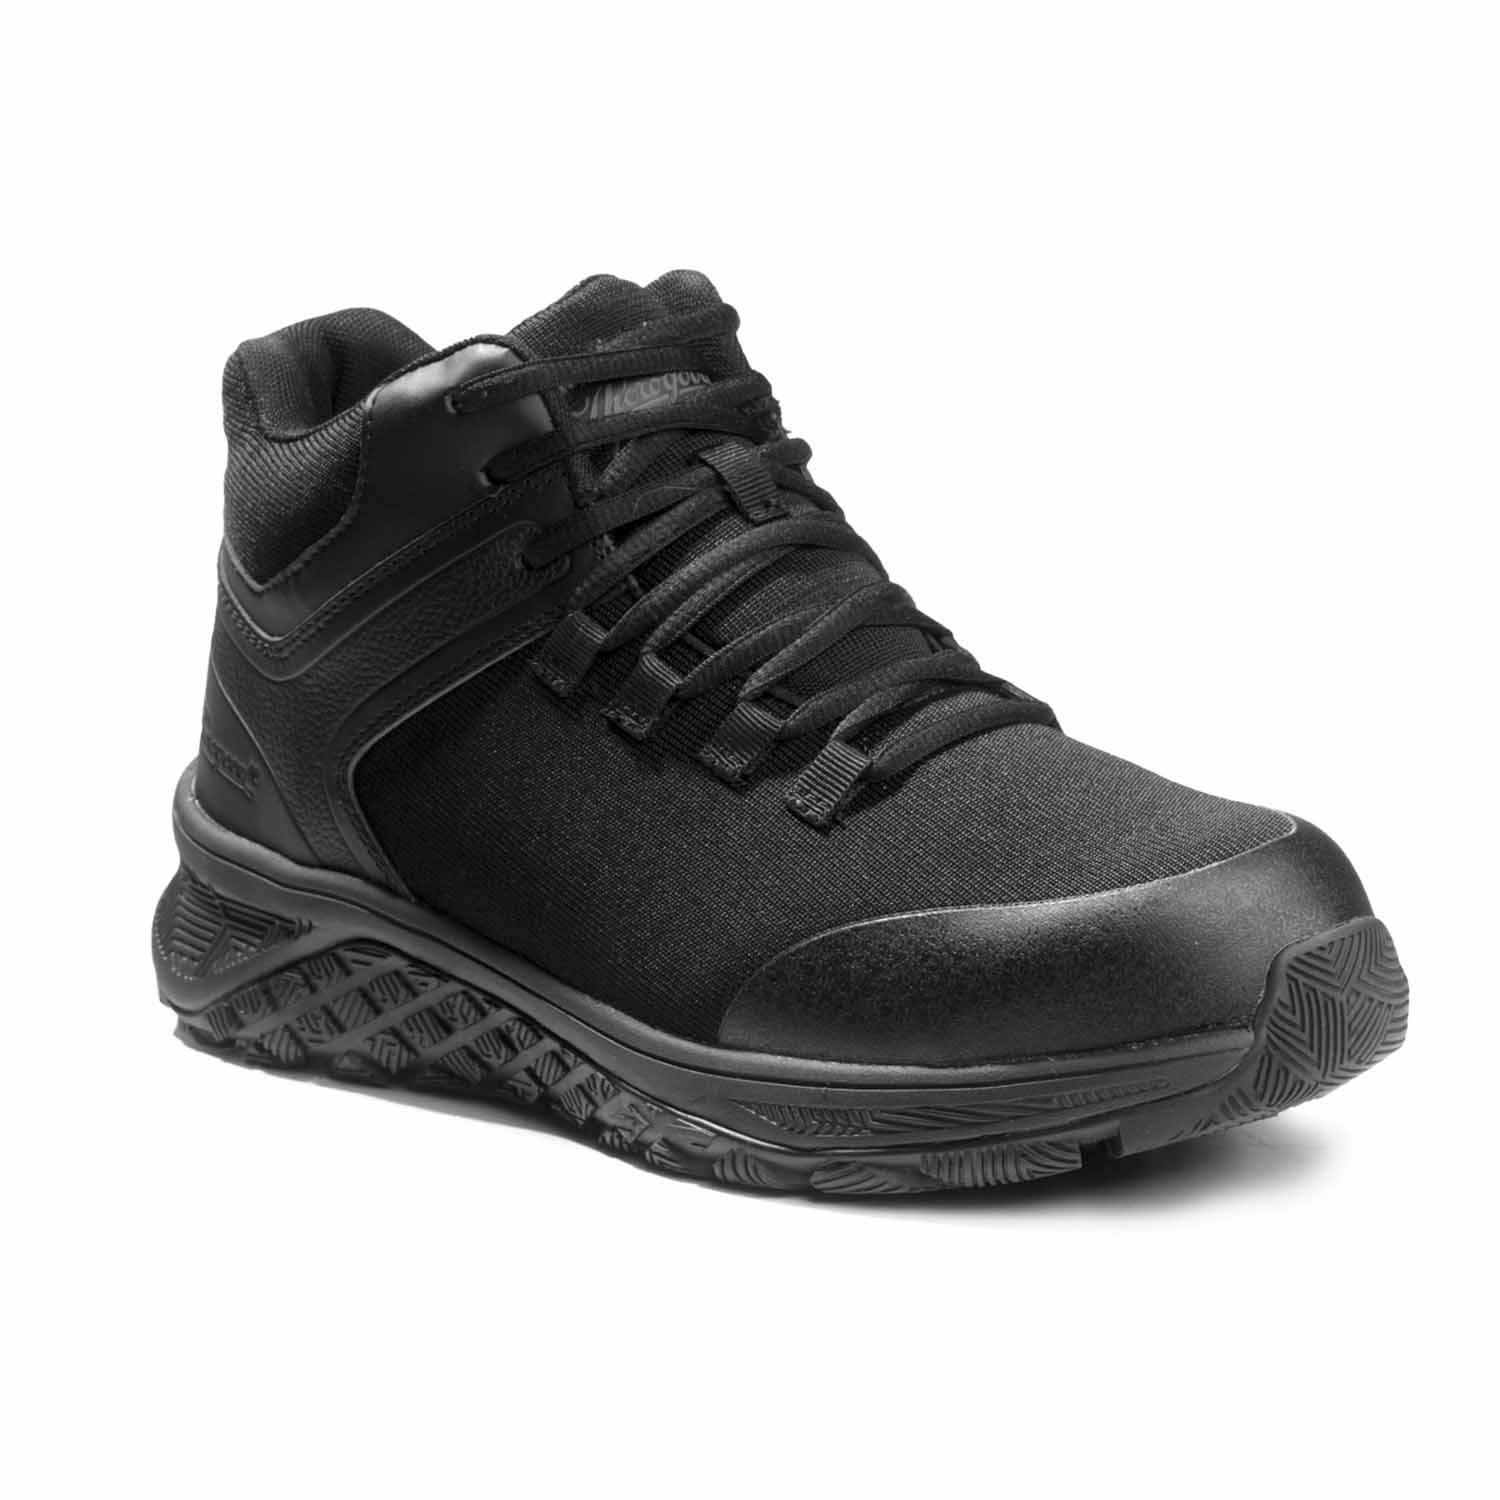 Thorogood T800 Mid Composite Toe Boots